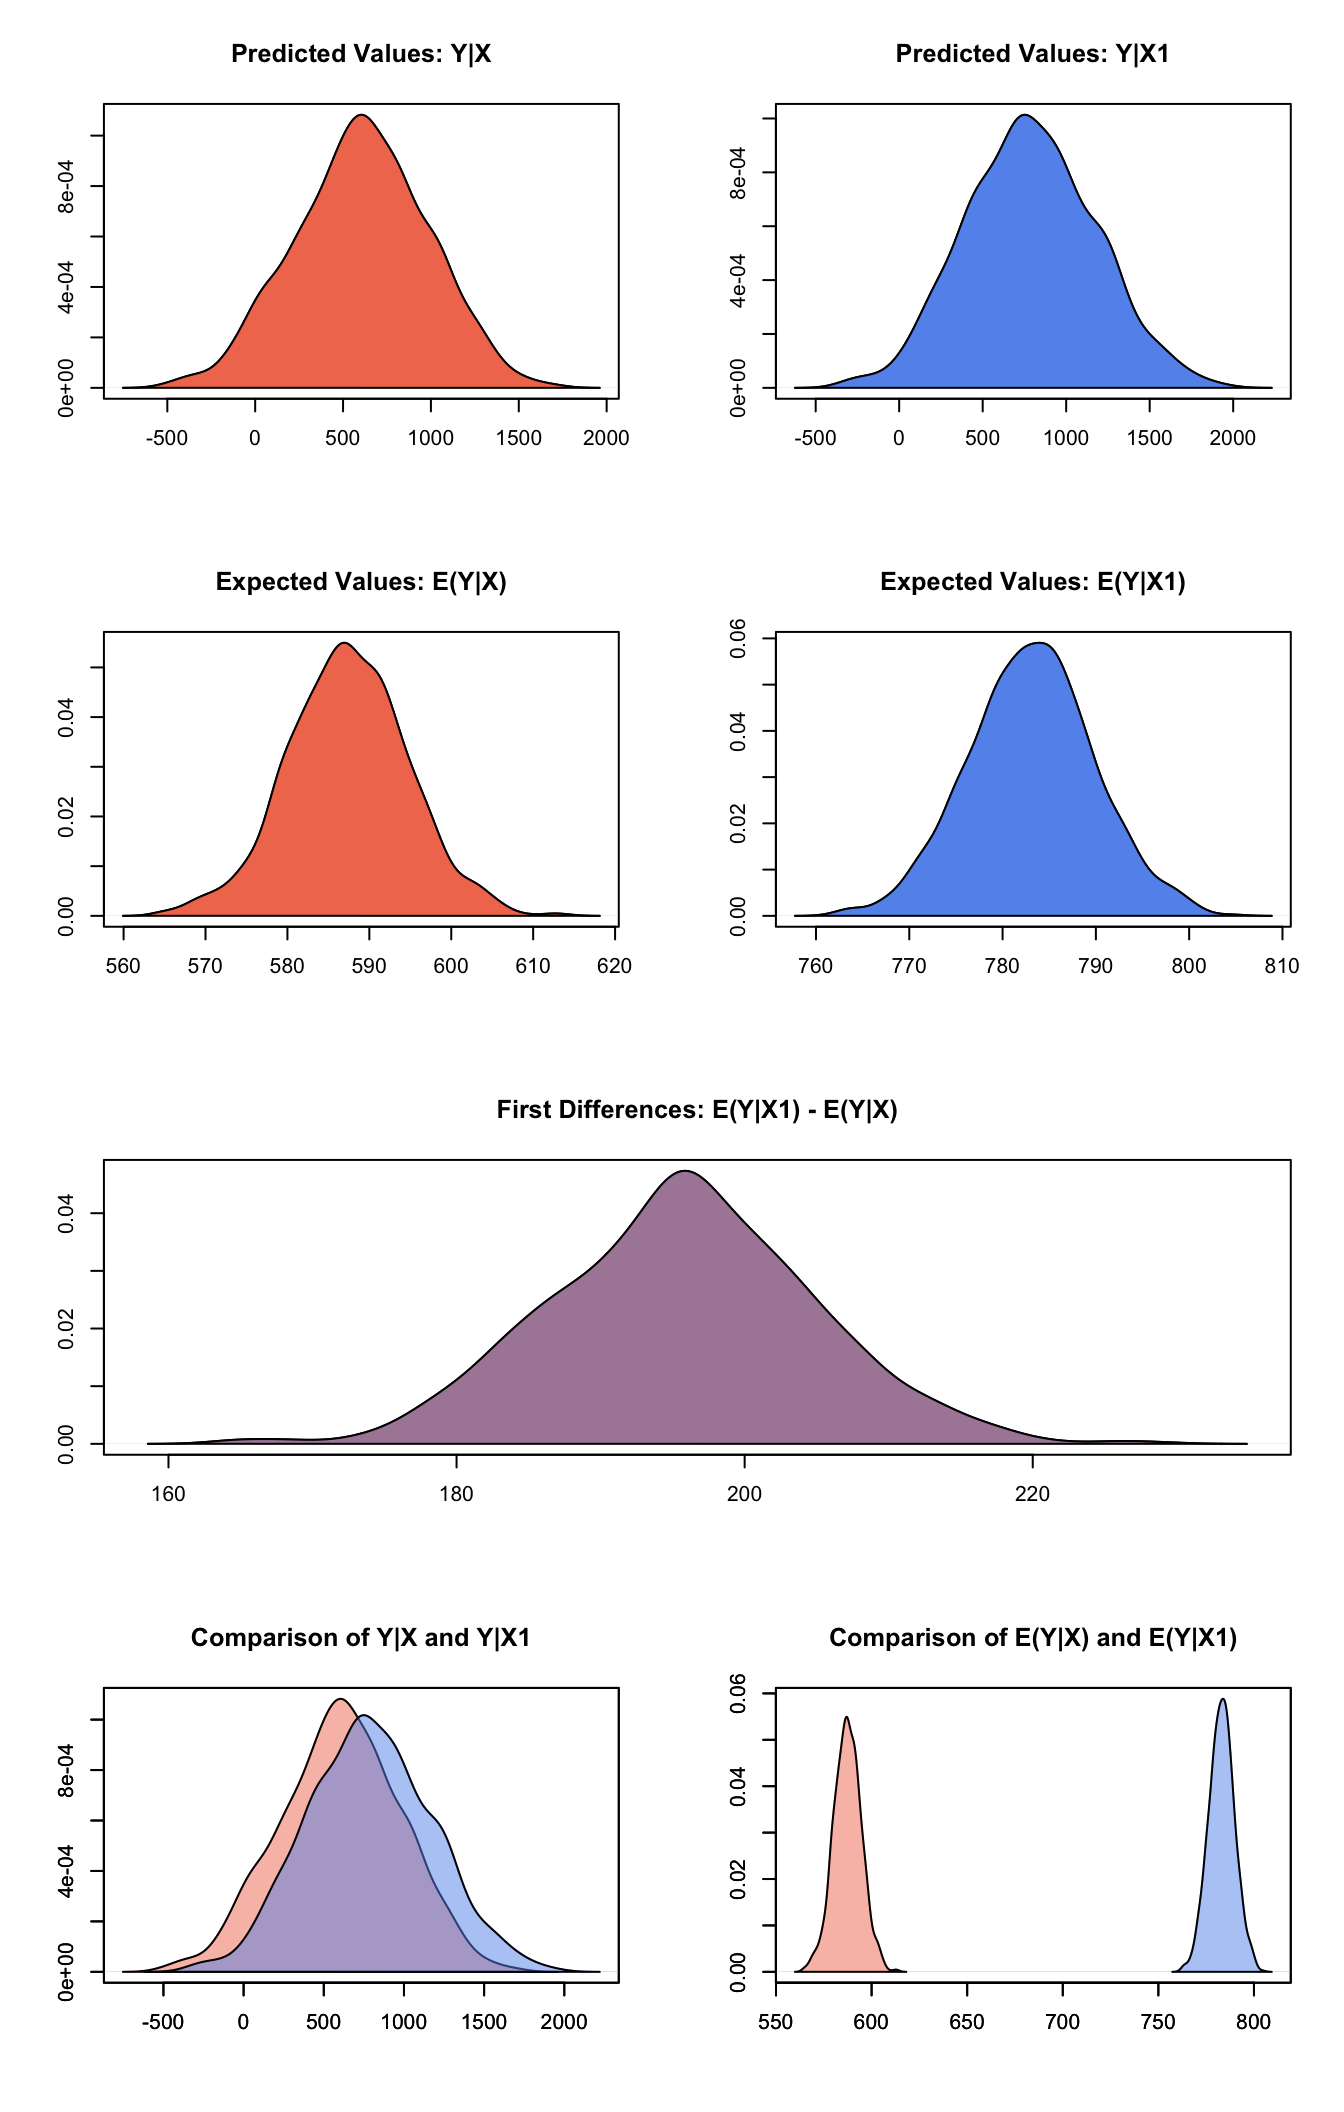 Graphs of Quantities of Interest for Normal Survey Model